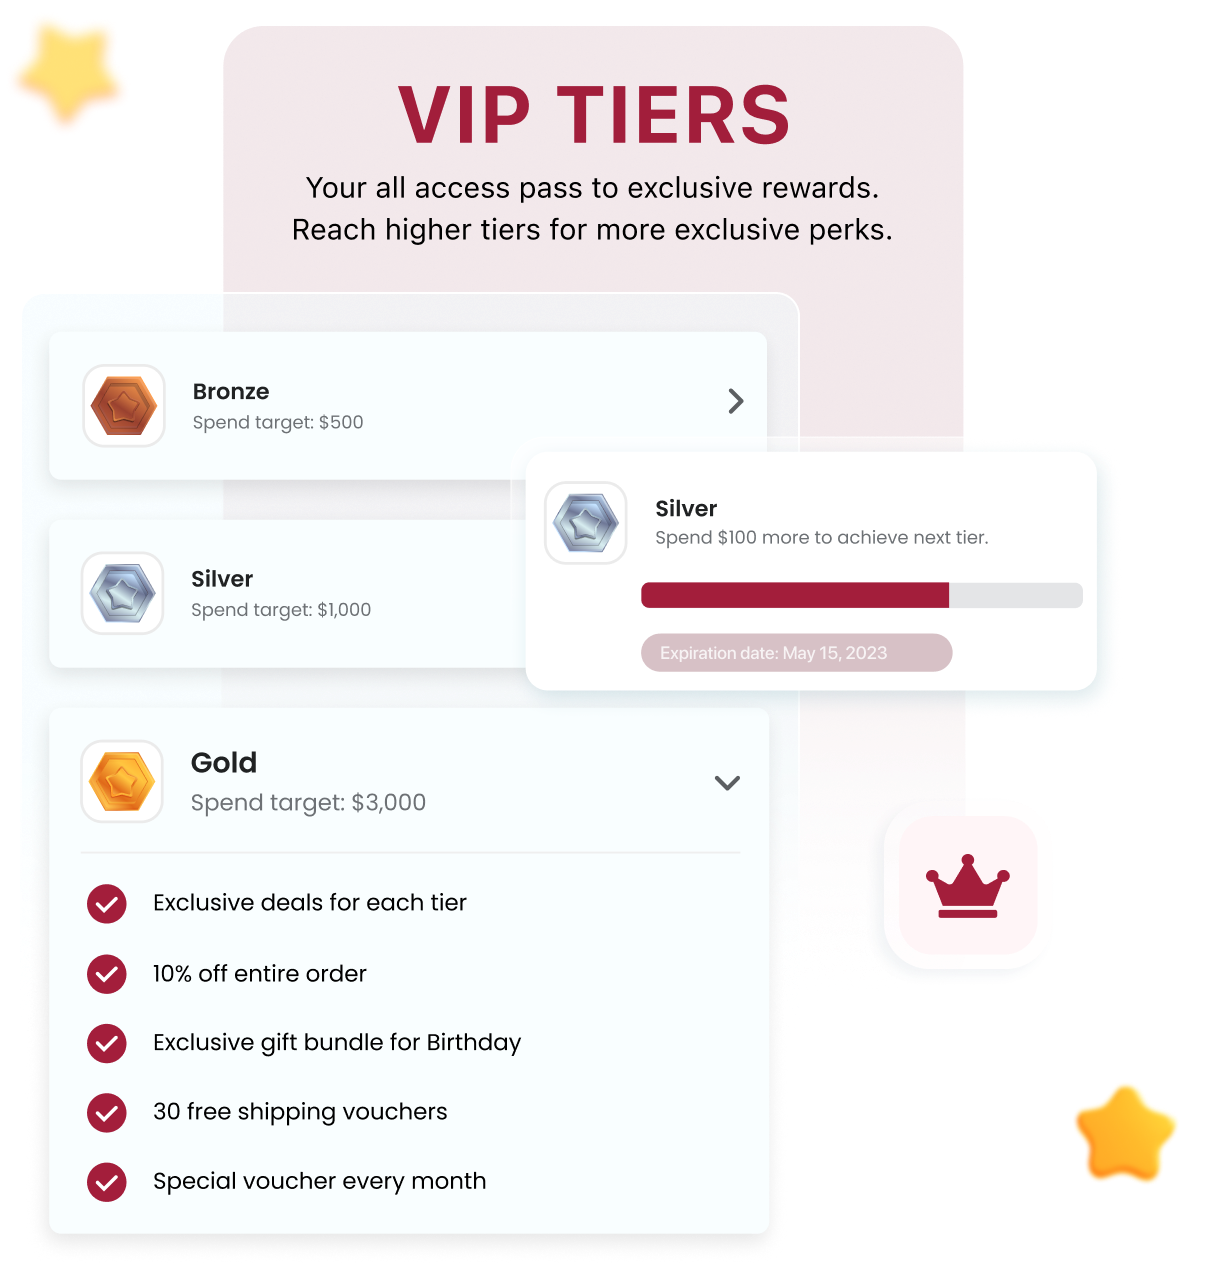 VIP treatment for your best customers